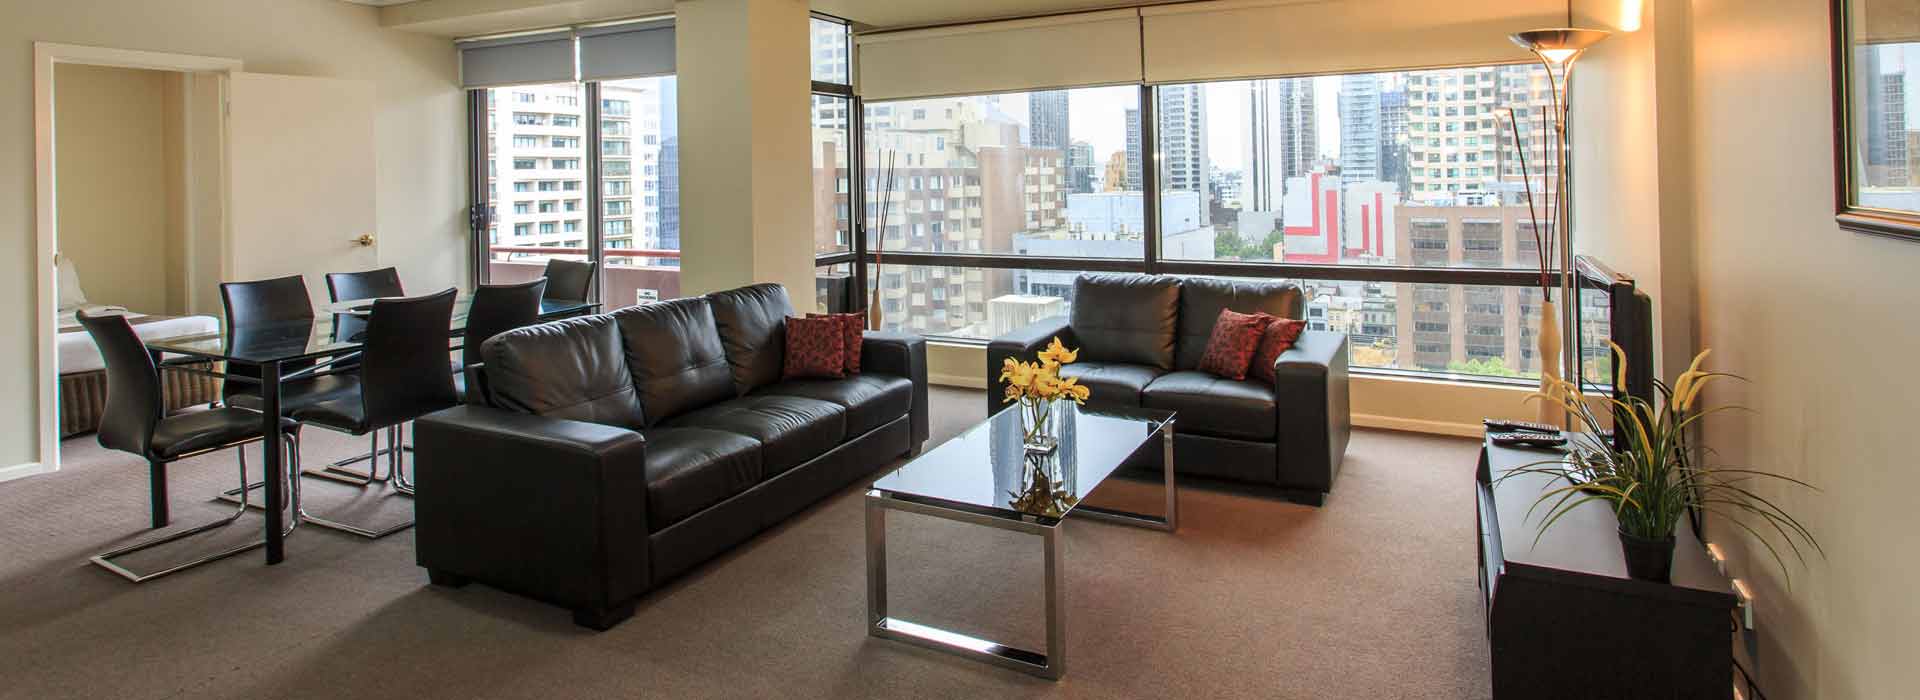 Melbourne 3 Bedroom Apartments Paramount Serviced